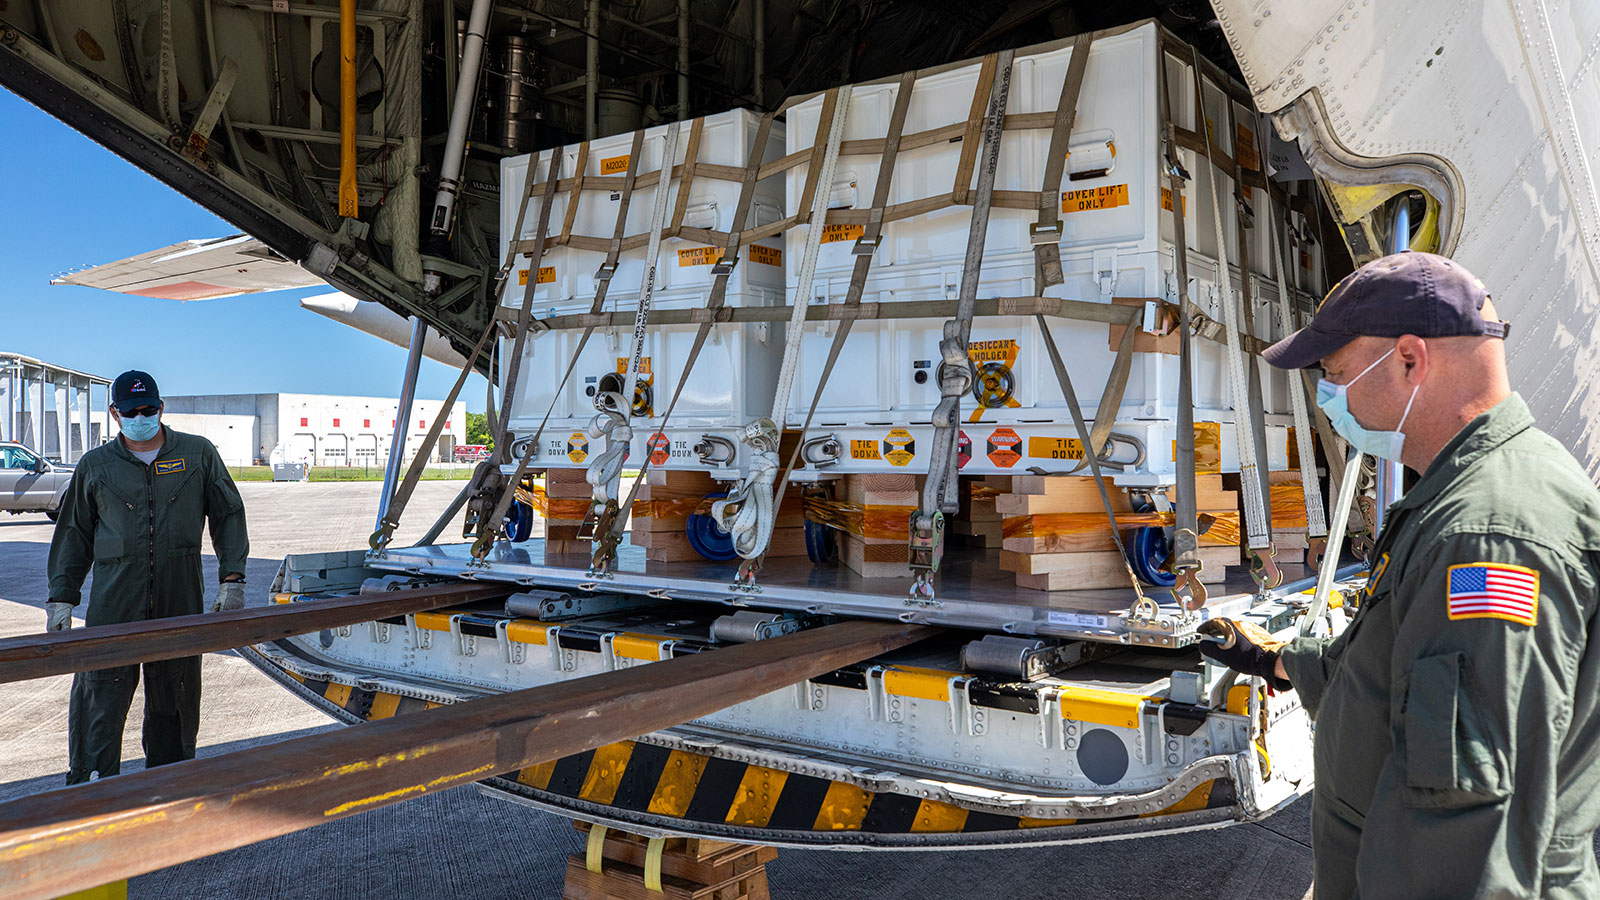 Perseverance mission flight hardware, test gear and equipment delivered to Kennedy Space Center is unloaded from a NASA Wallops C-130.